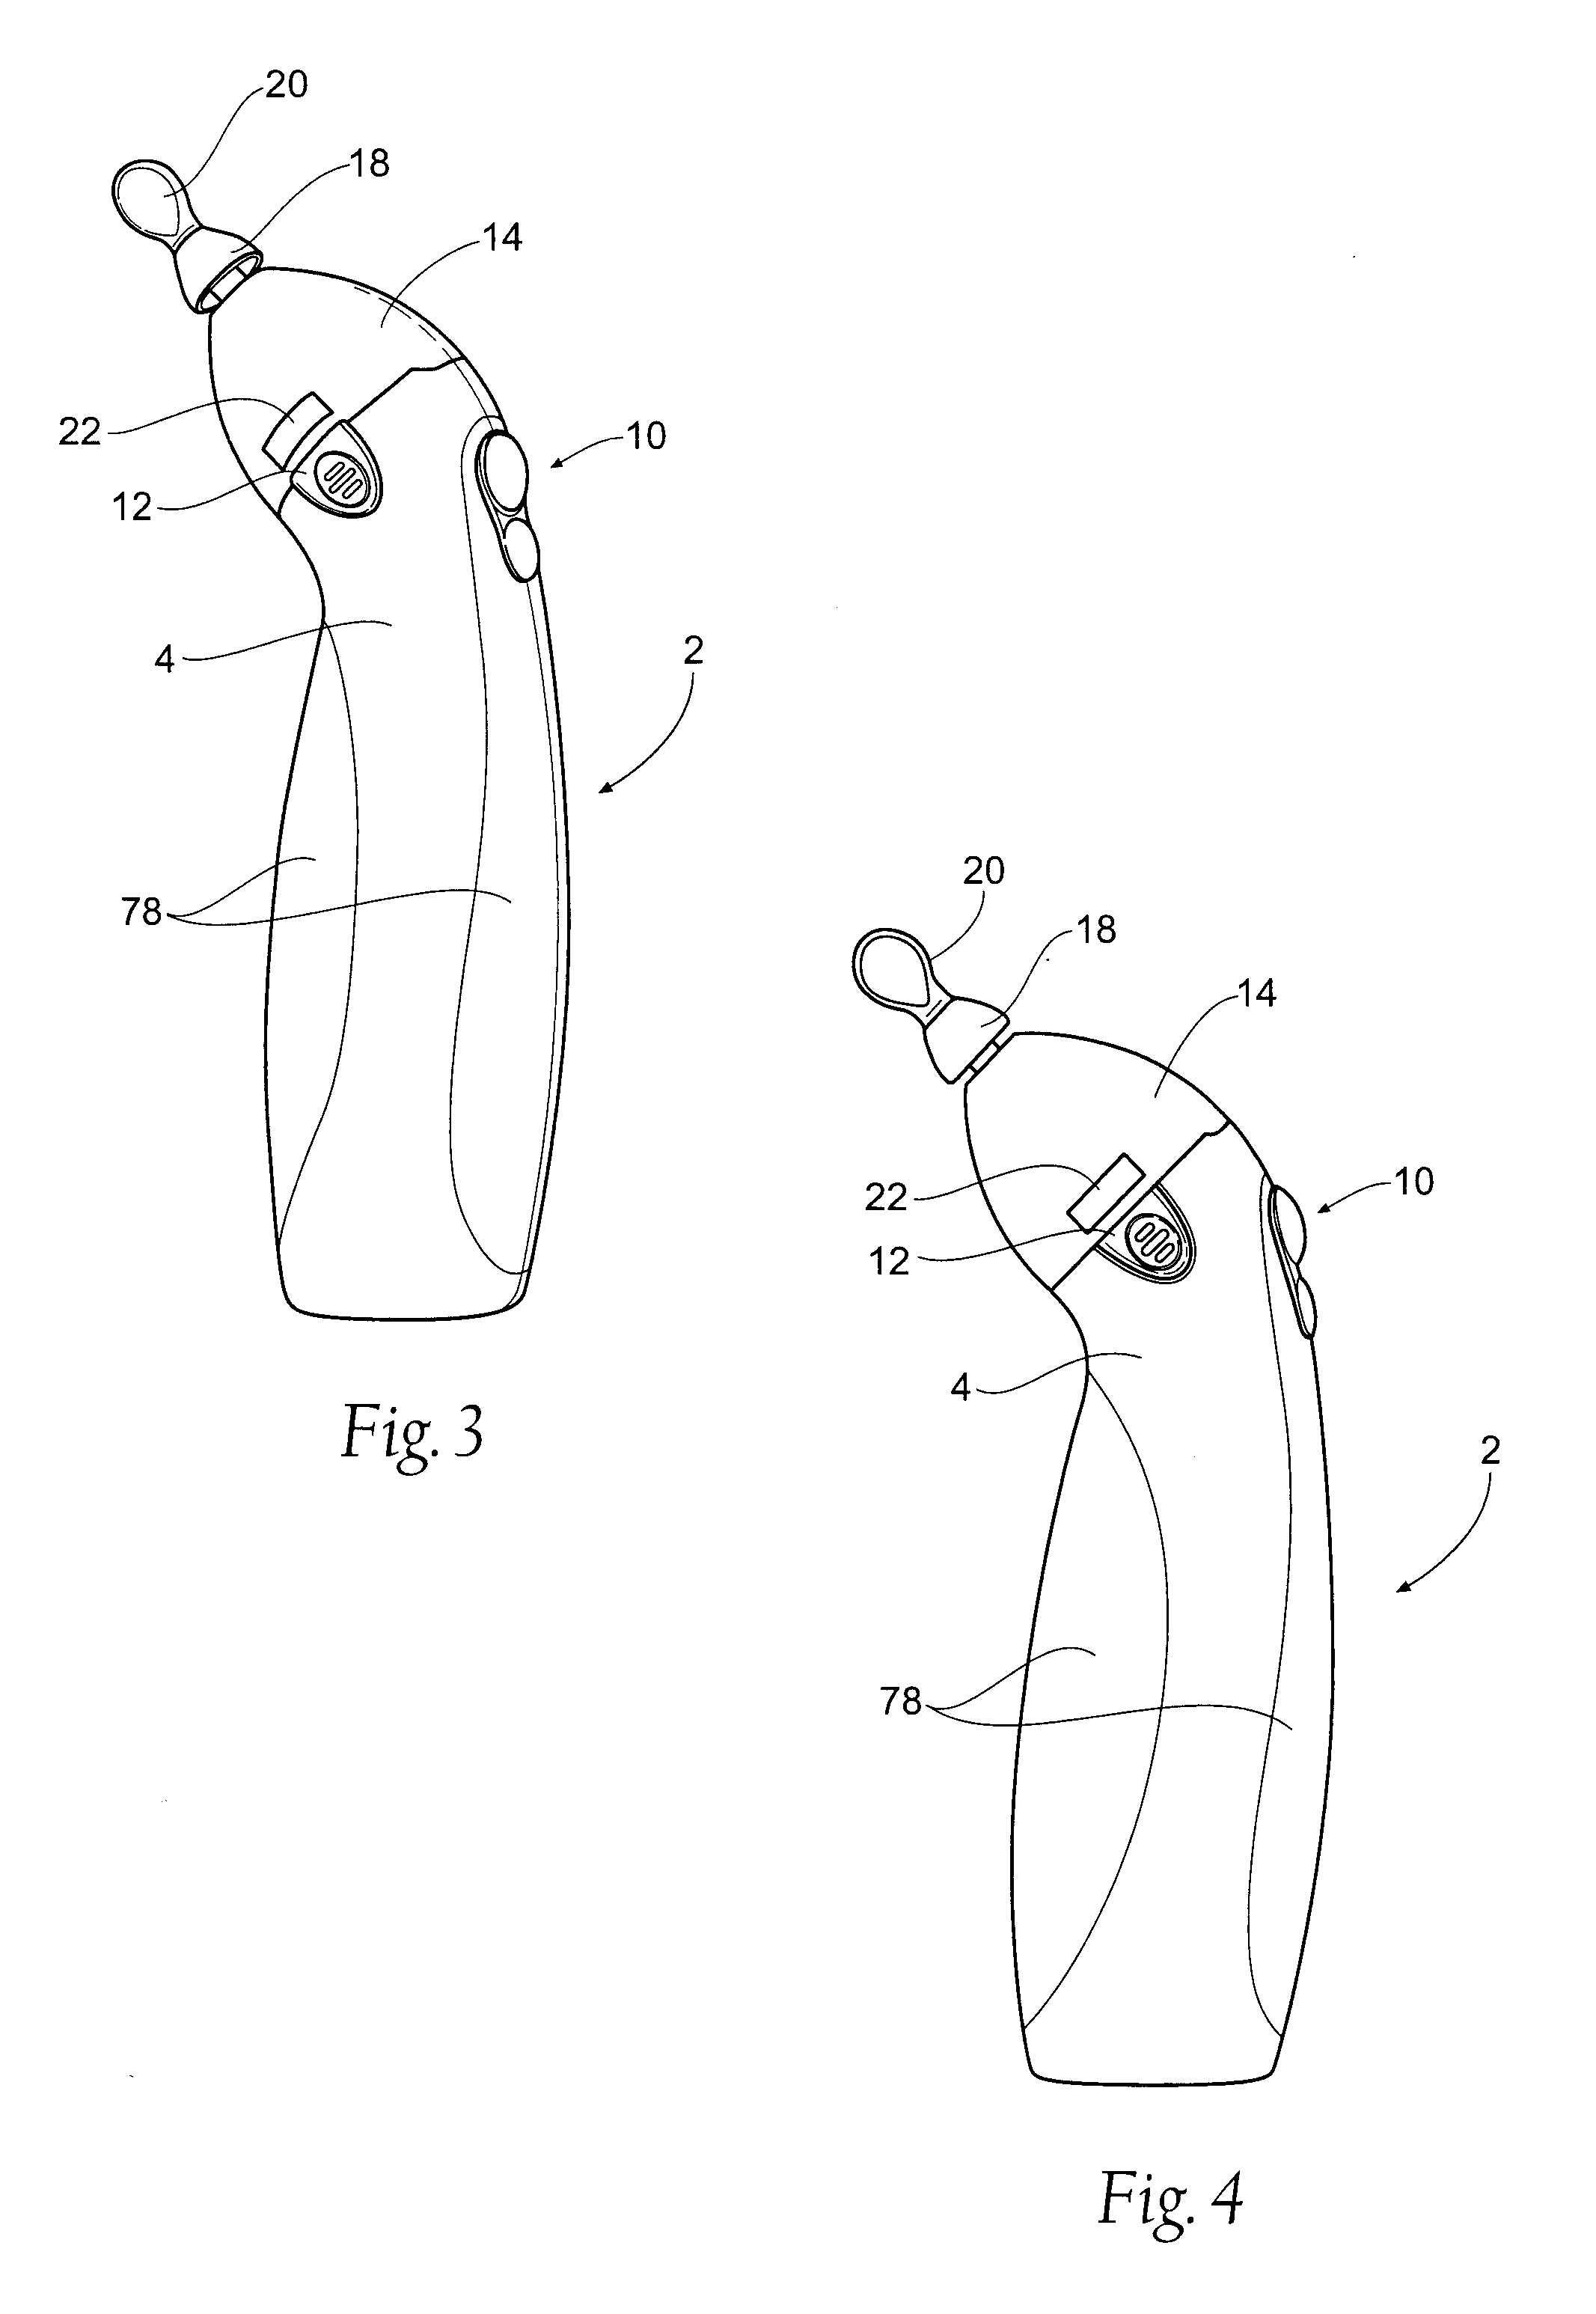 Irrigation and aspiration devices and methods